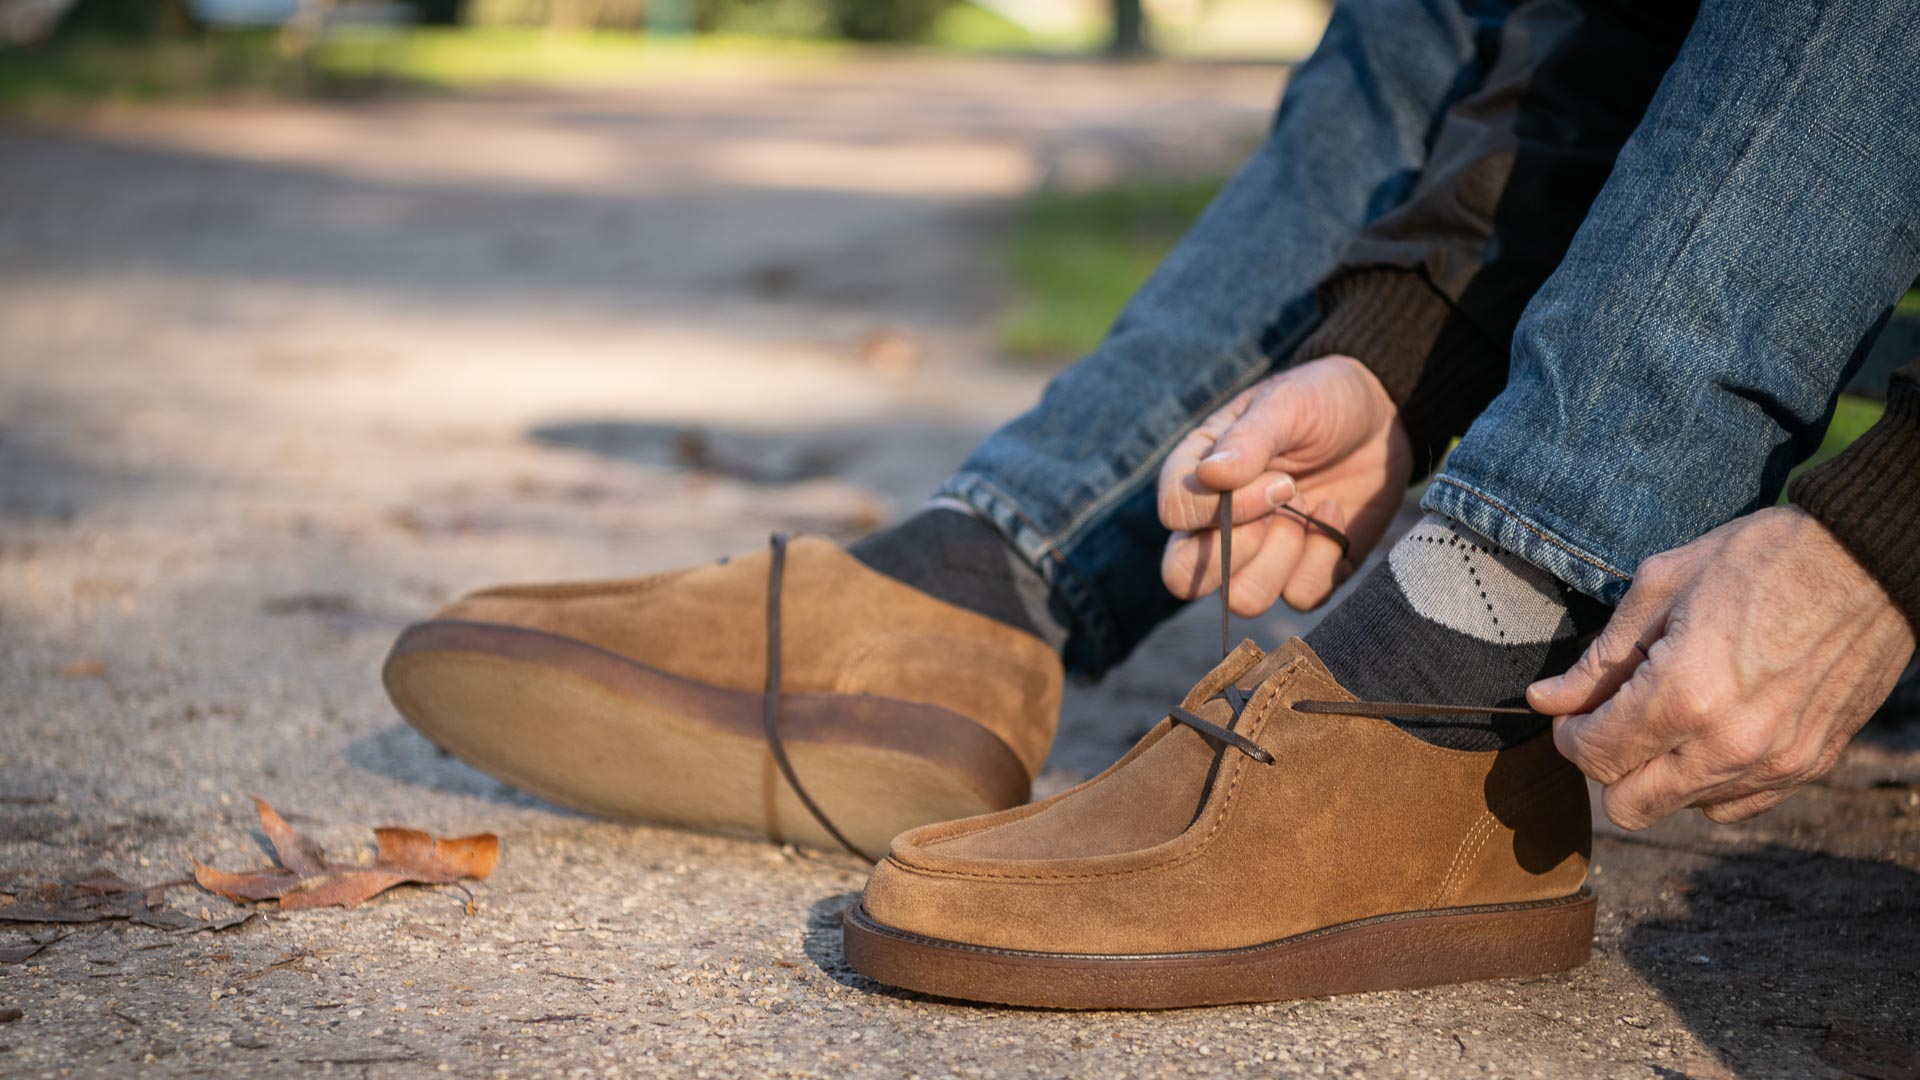 Clarks Wallabee Step On Feet, Wallabee Step Unboxing